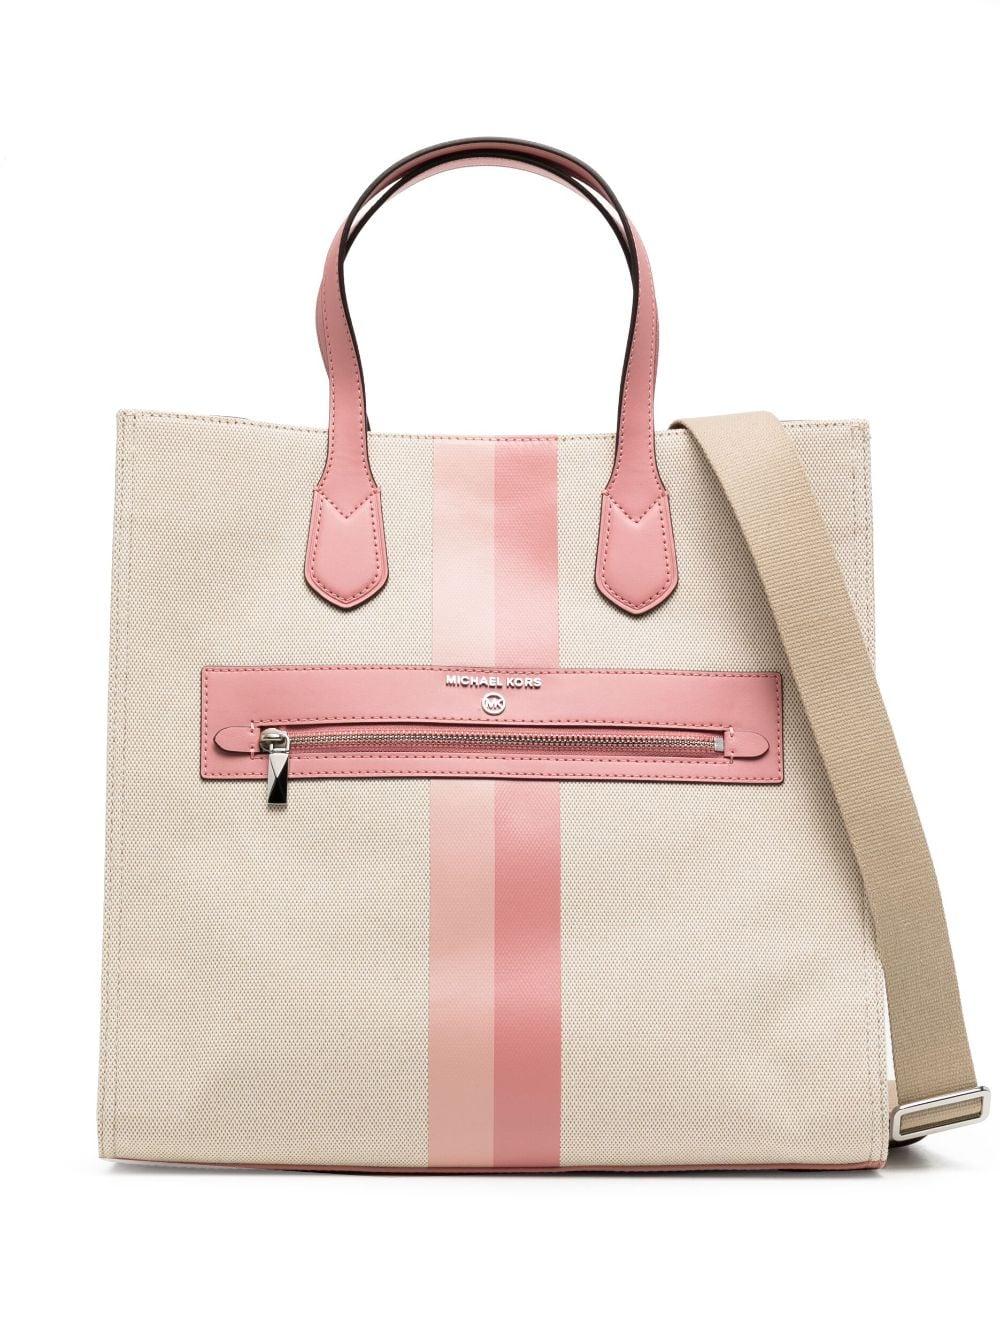 Michael Kors Edith Large Open Leather Tote Bag Soft Pink Detachable Pouch  New